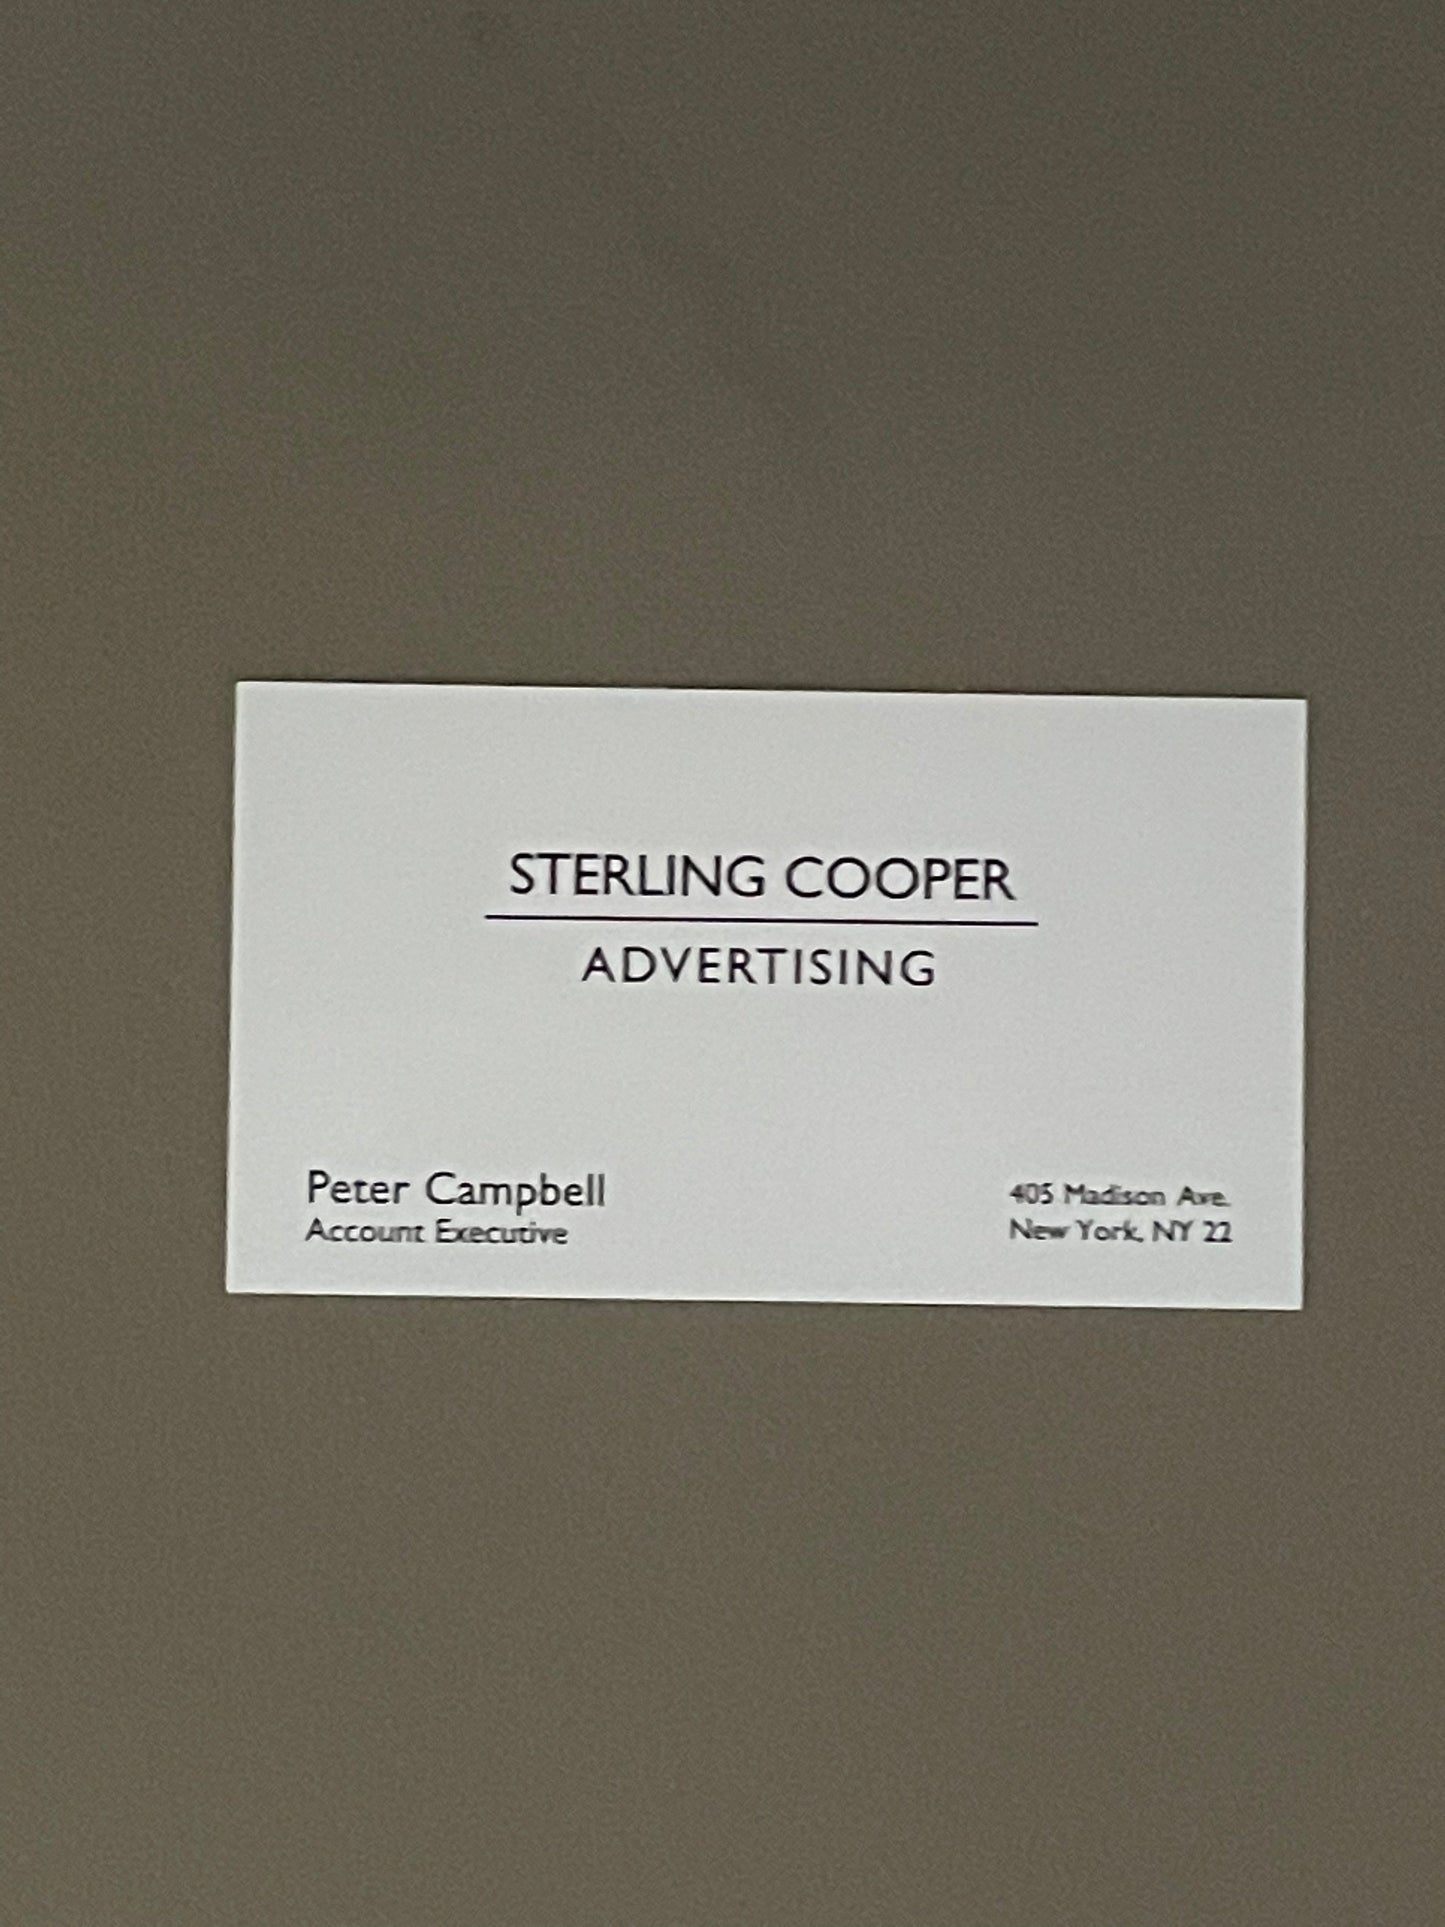 Mad Men: Peter Campbell's Sterling Cooper Business Card